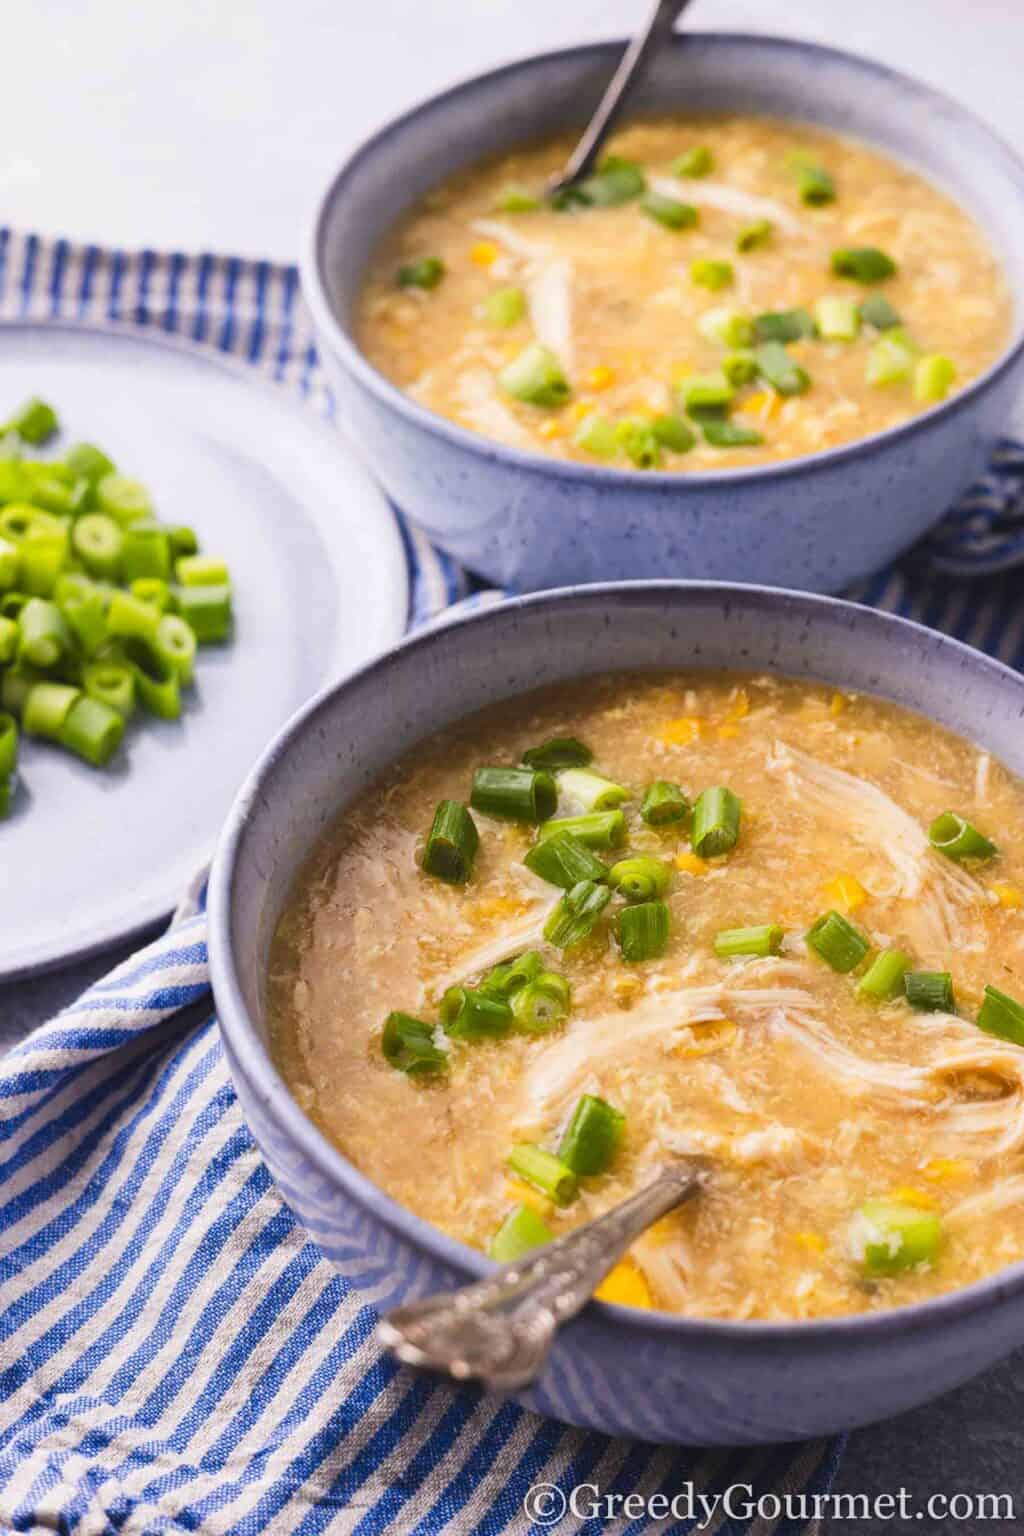 Chinese Chicken And Sweetcorn Soup | Greedy Gourmet